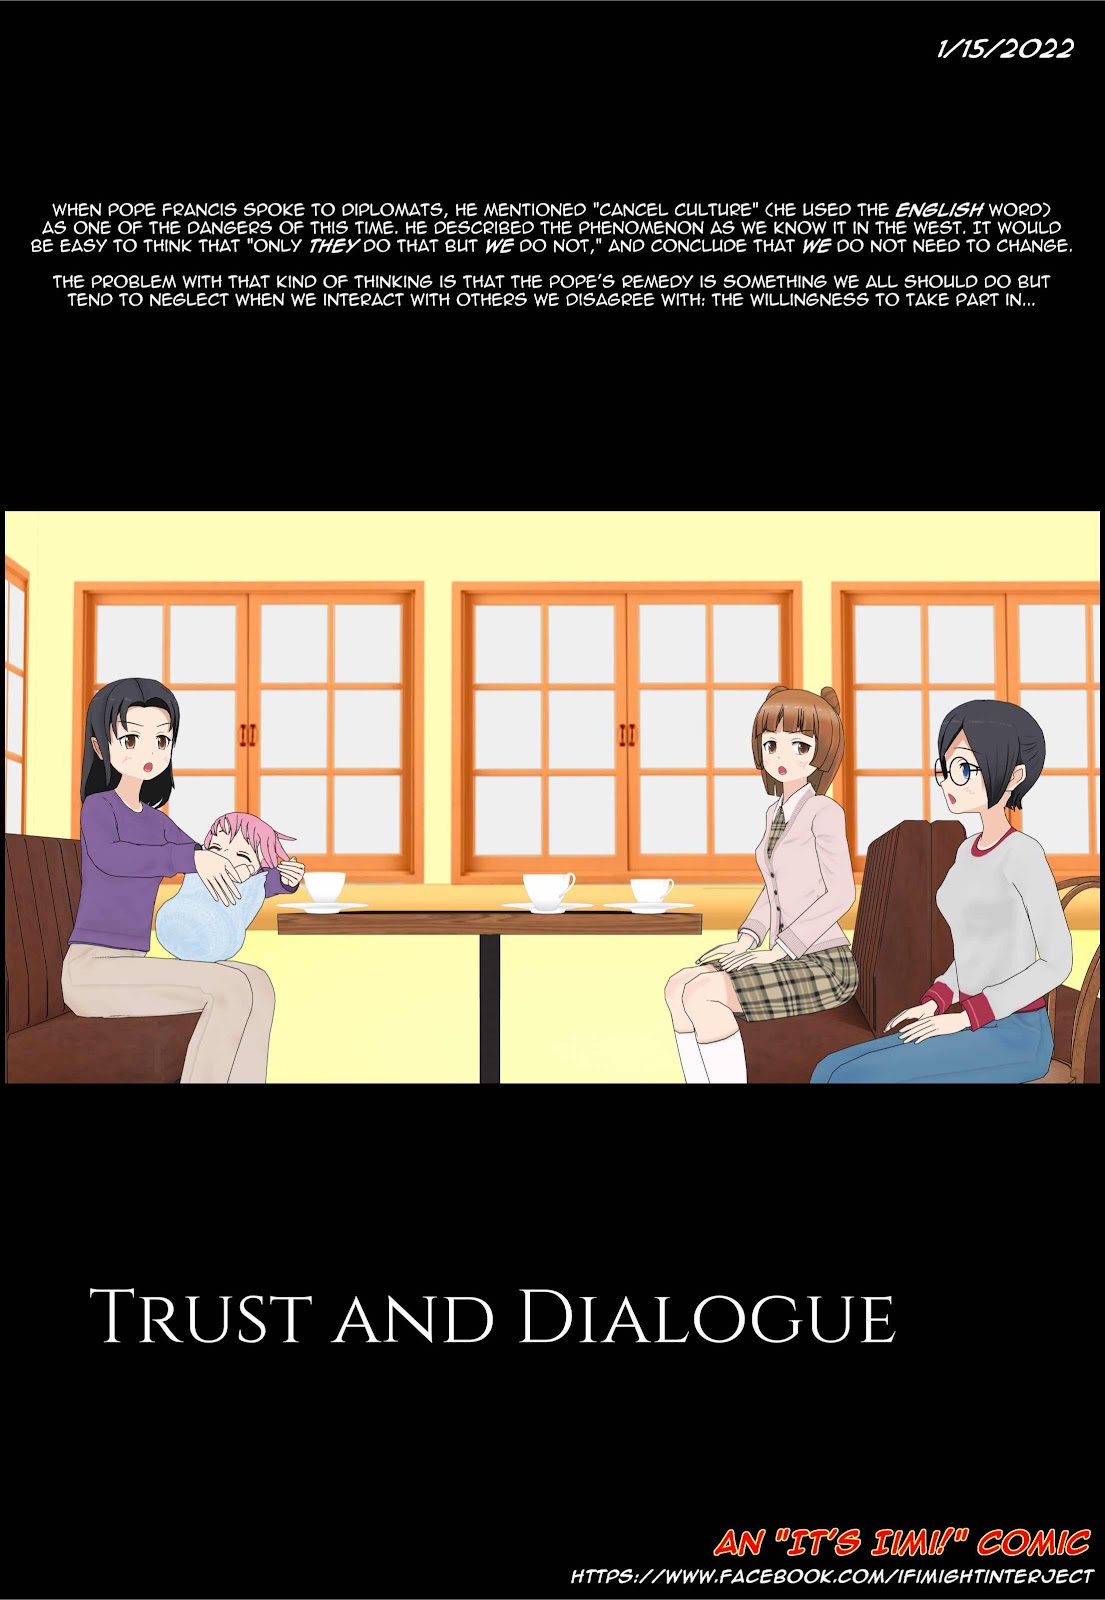 It’s Iimi! Trust and Dialogue